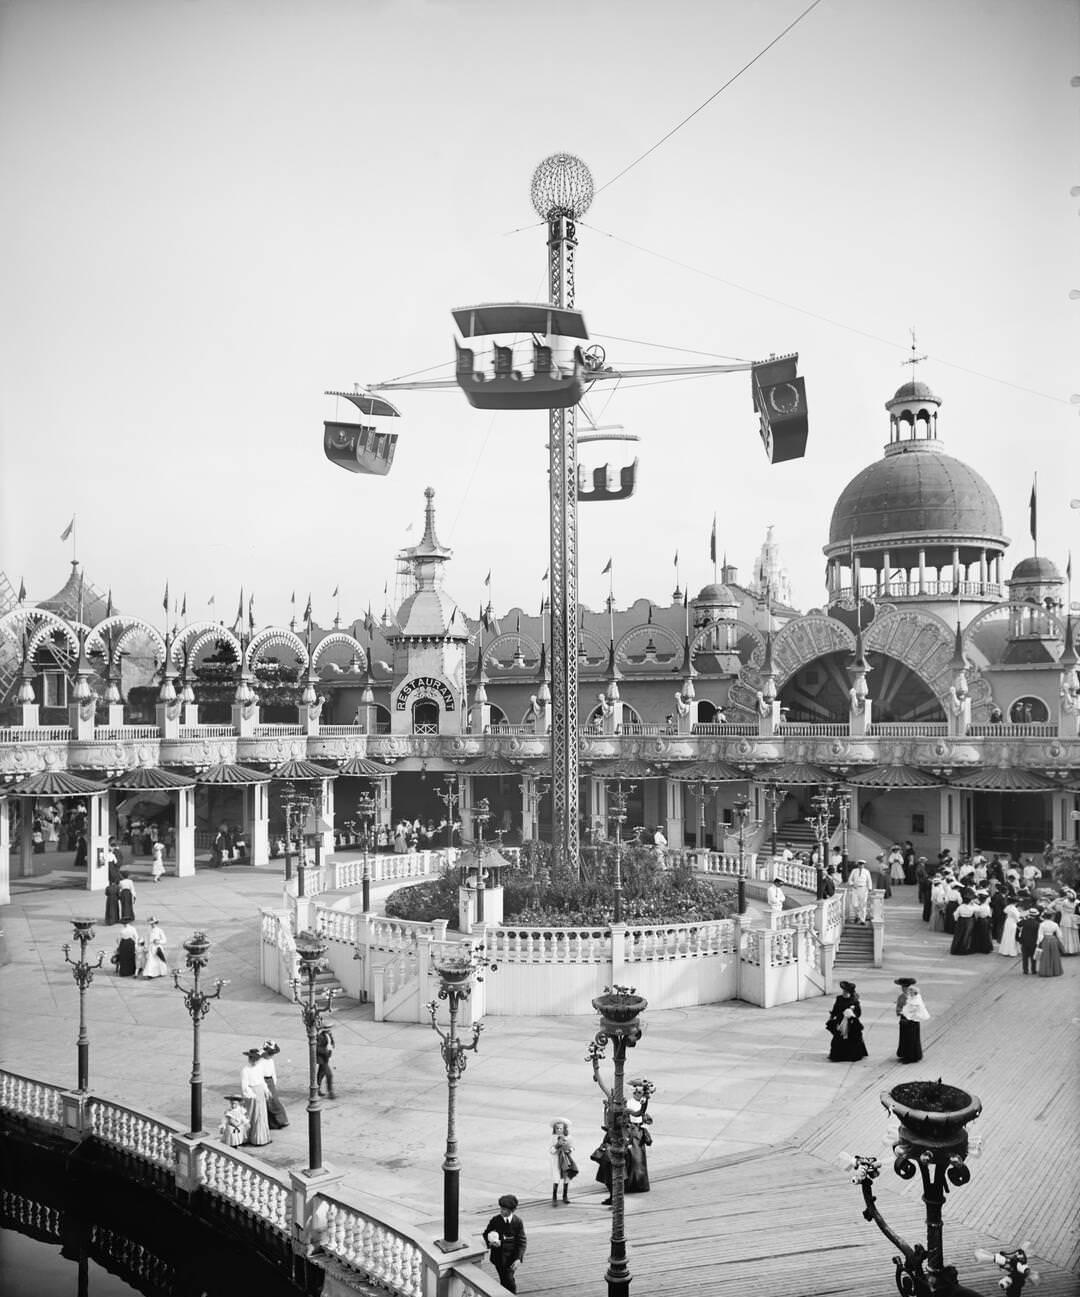 Whirl Of The Whirl In Luna Park, Coney Island, Brooklyn, 1905